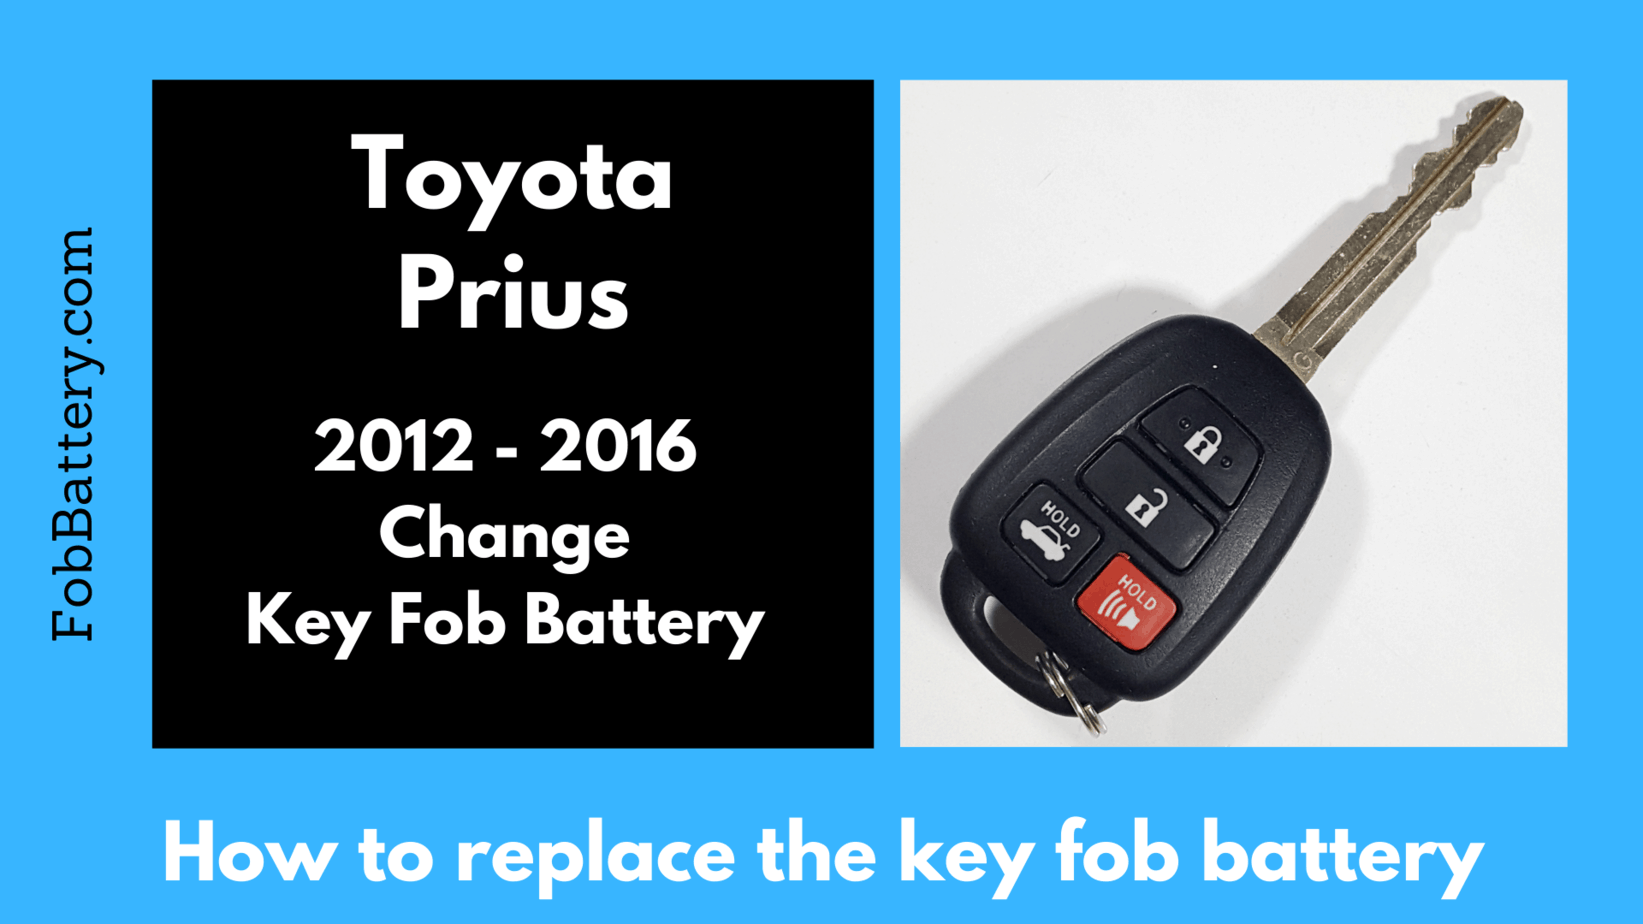 Toyota Prius key fob battery replacement